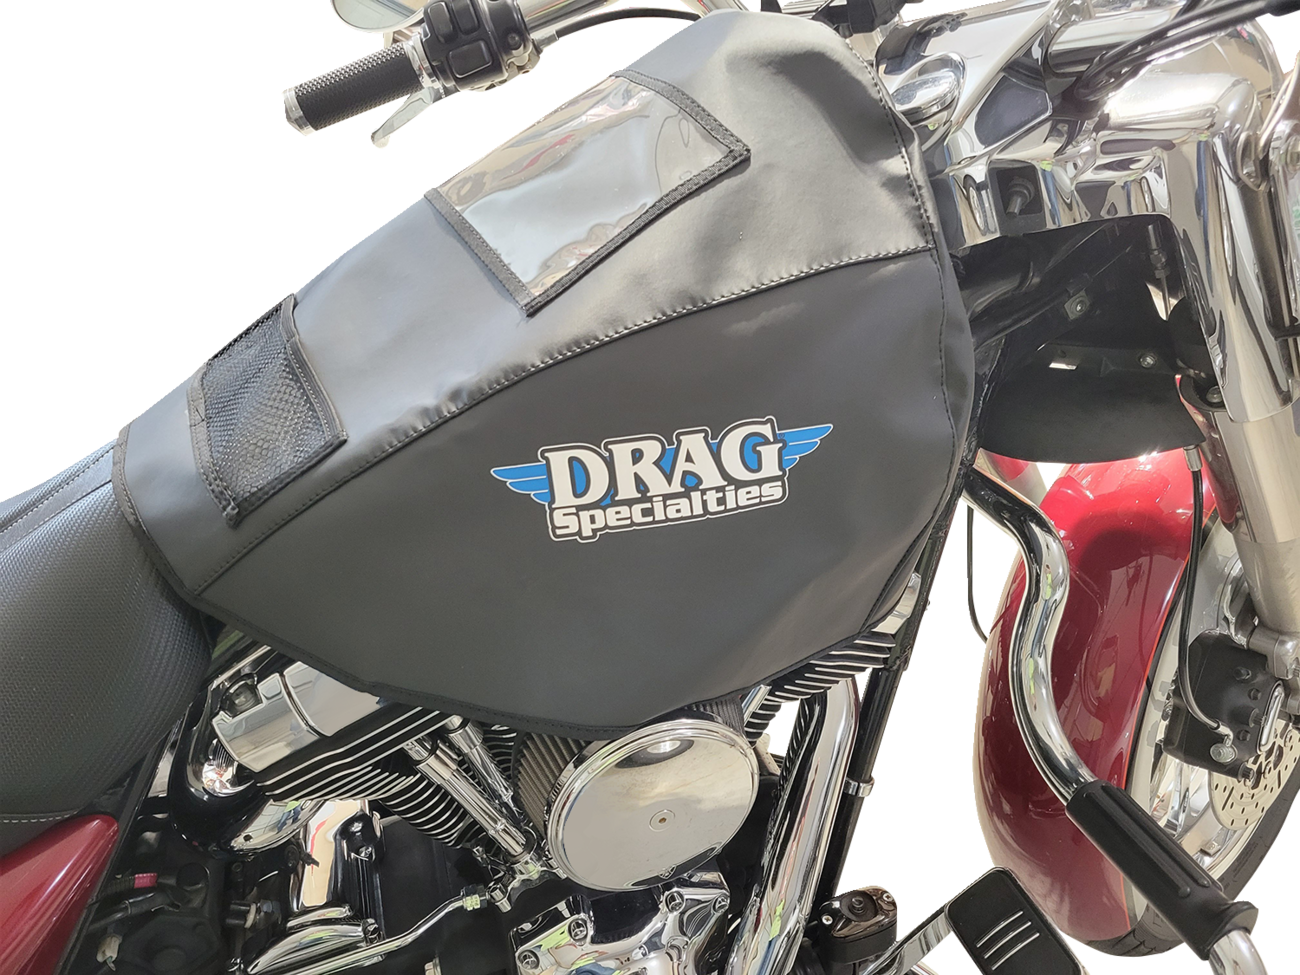 Drag Specialties Gas Tank Mechanic Paint Protection Service Cover Touring Dyna